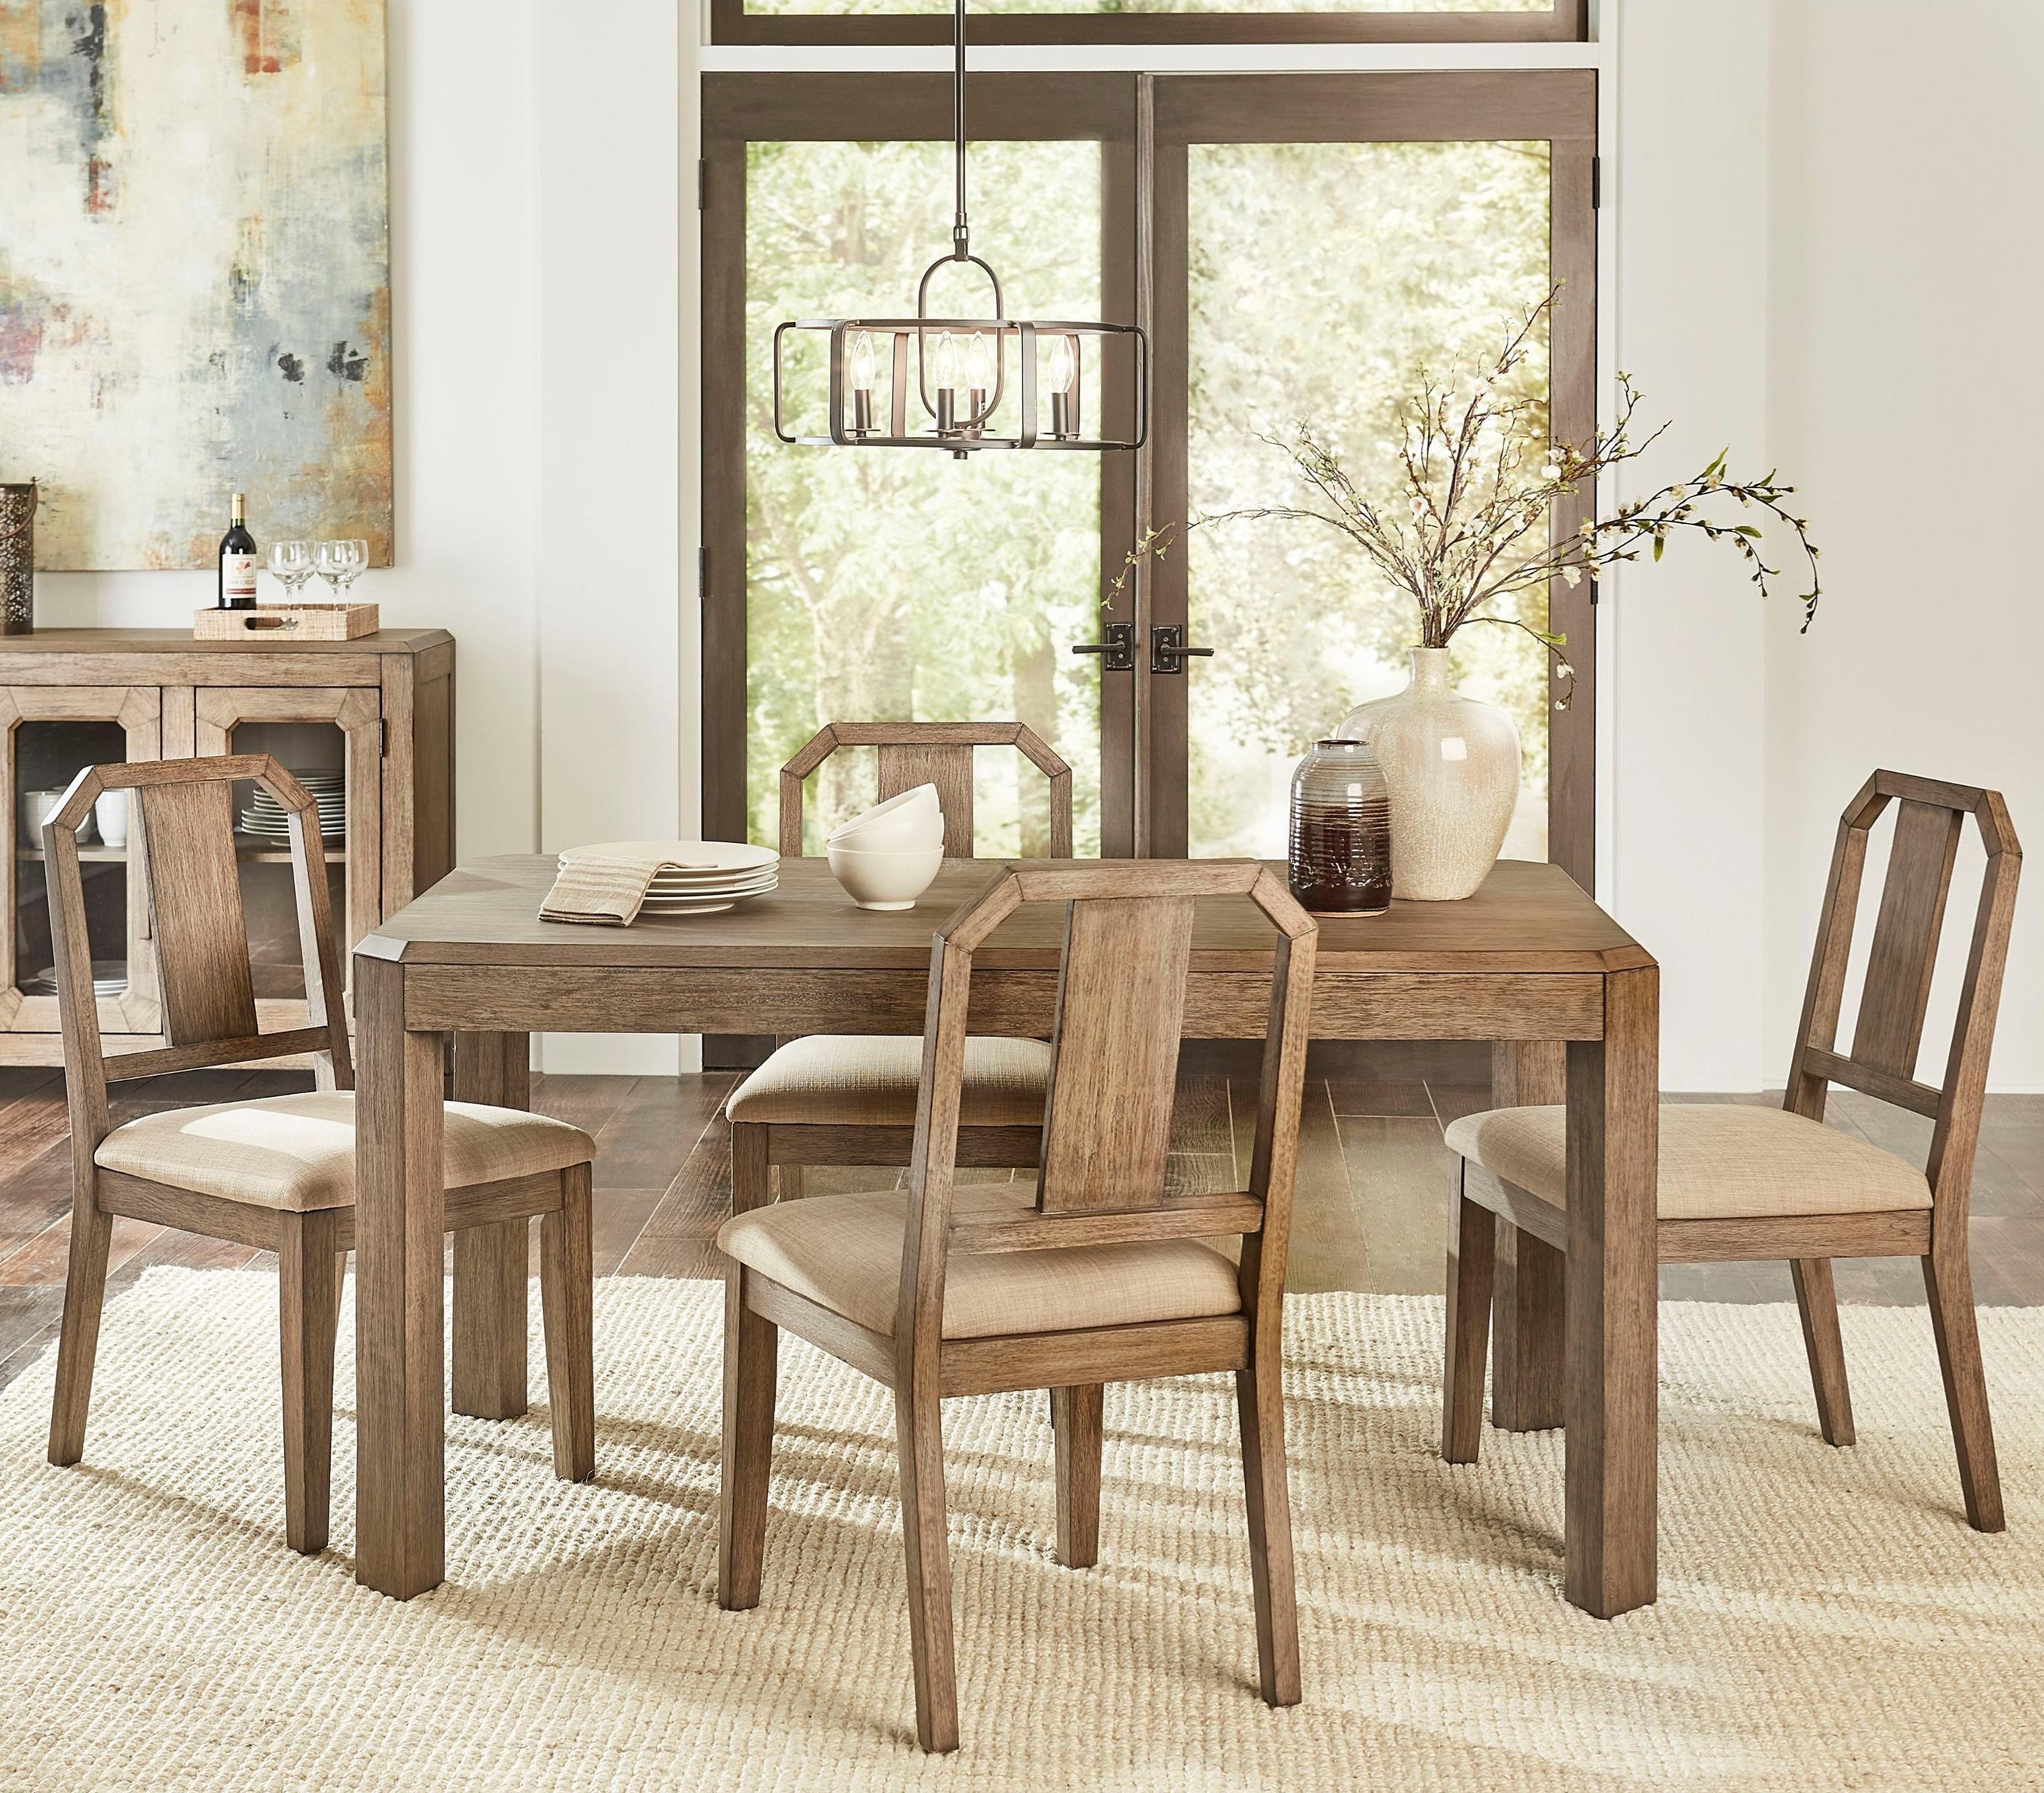 Transitional Dining Sets ACADIA GHCL60-5PC in Toffee, Beige Fabric